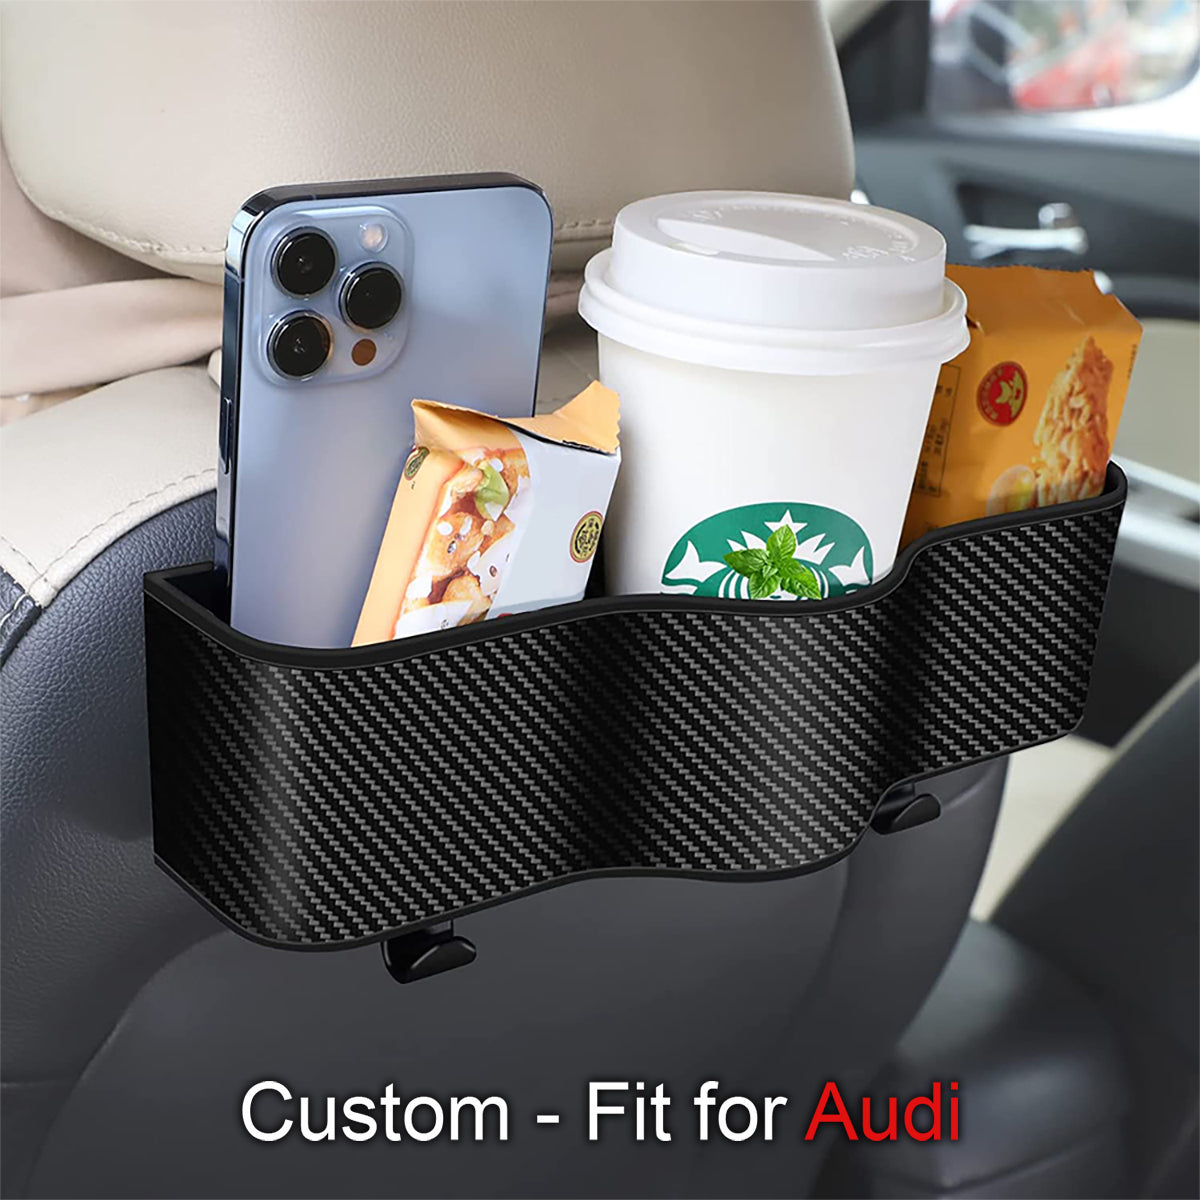 Car Headrest Backseat Organizer with Cup Holders, Custom-Fit For Car, Seat Back Organizer Perfect for Eating in Your Car, Back Seat Organizer for Kids RA242